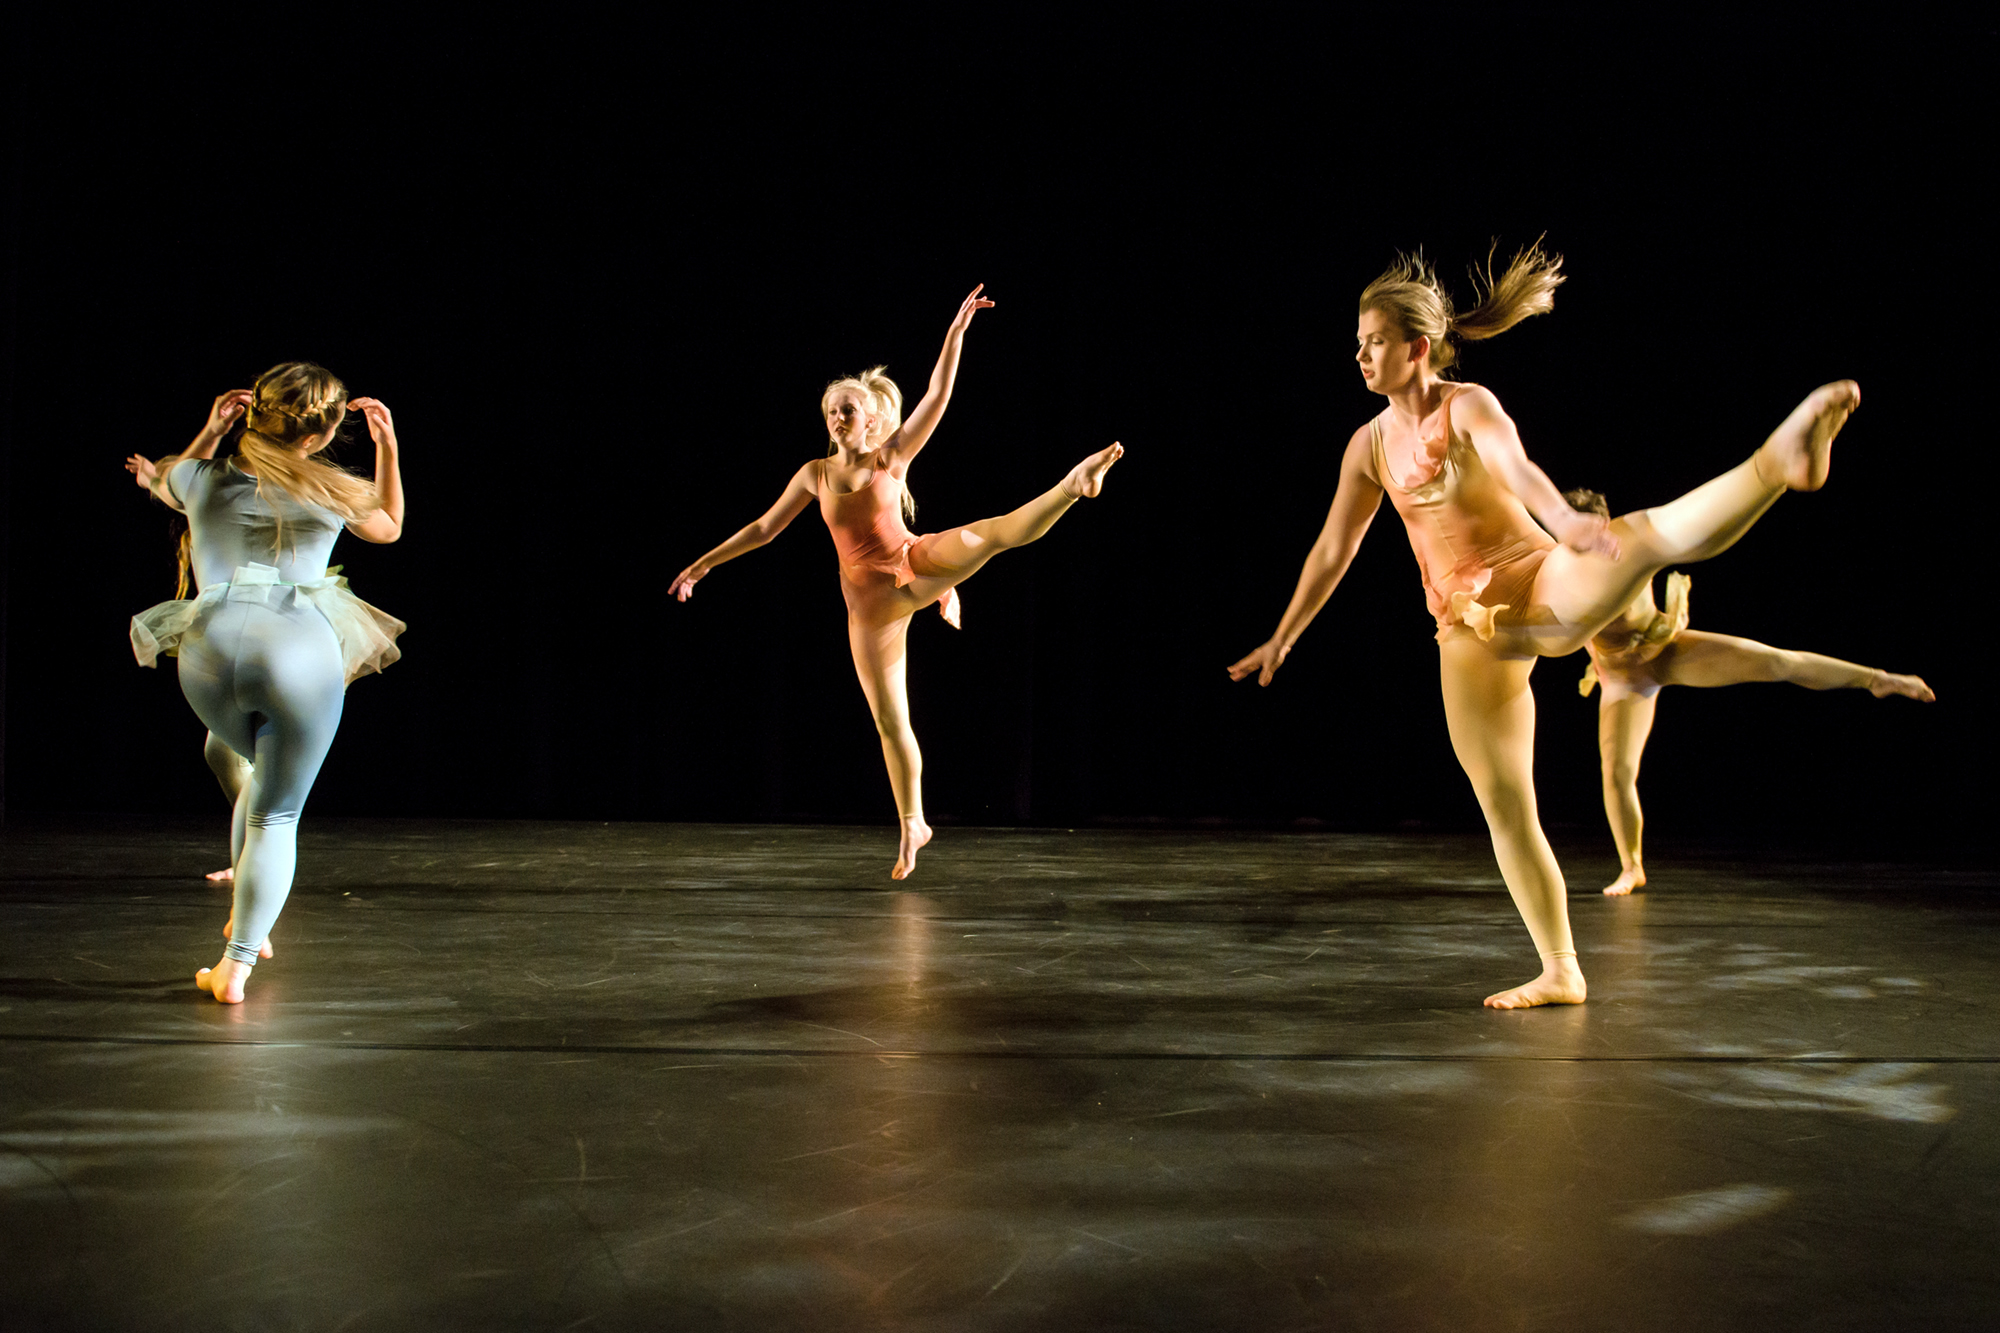 Five dancers on stage against a dark background